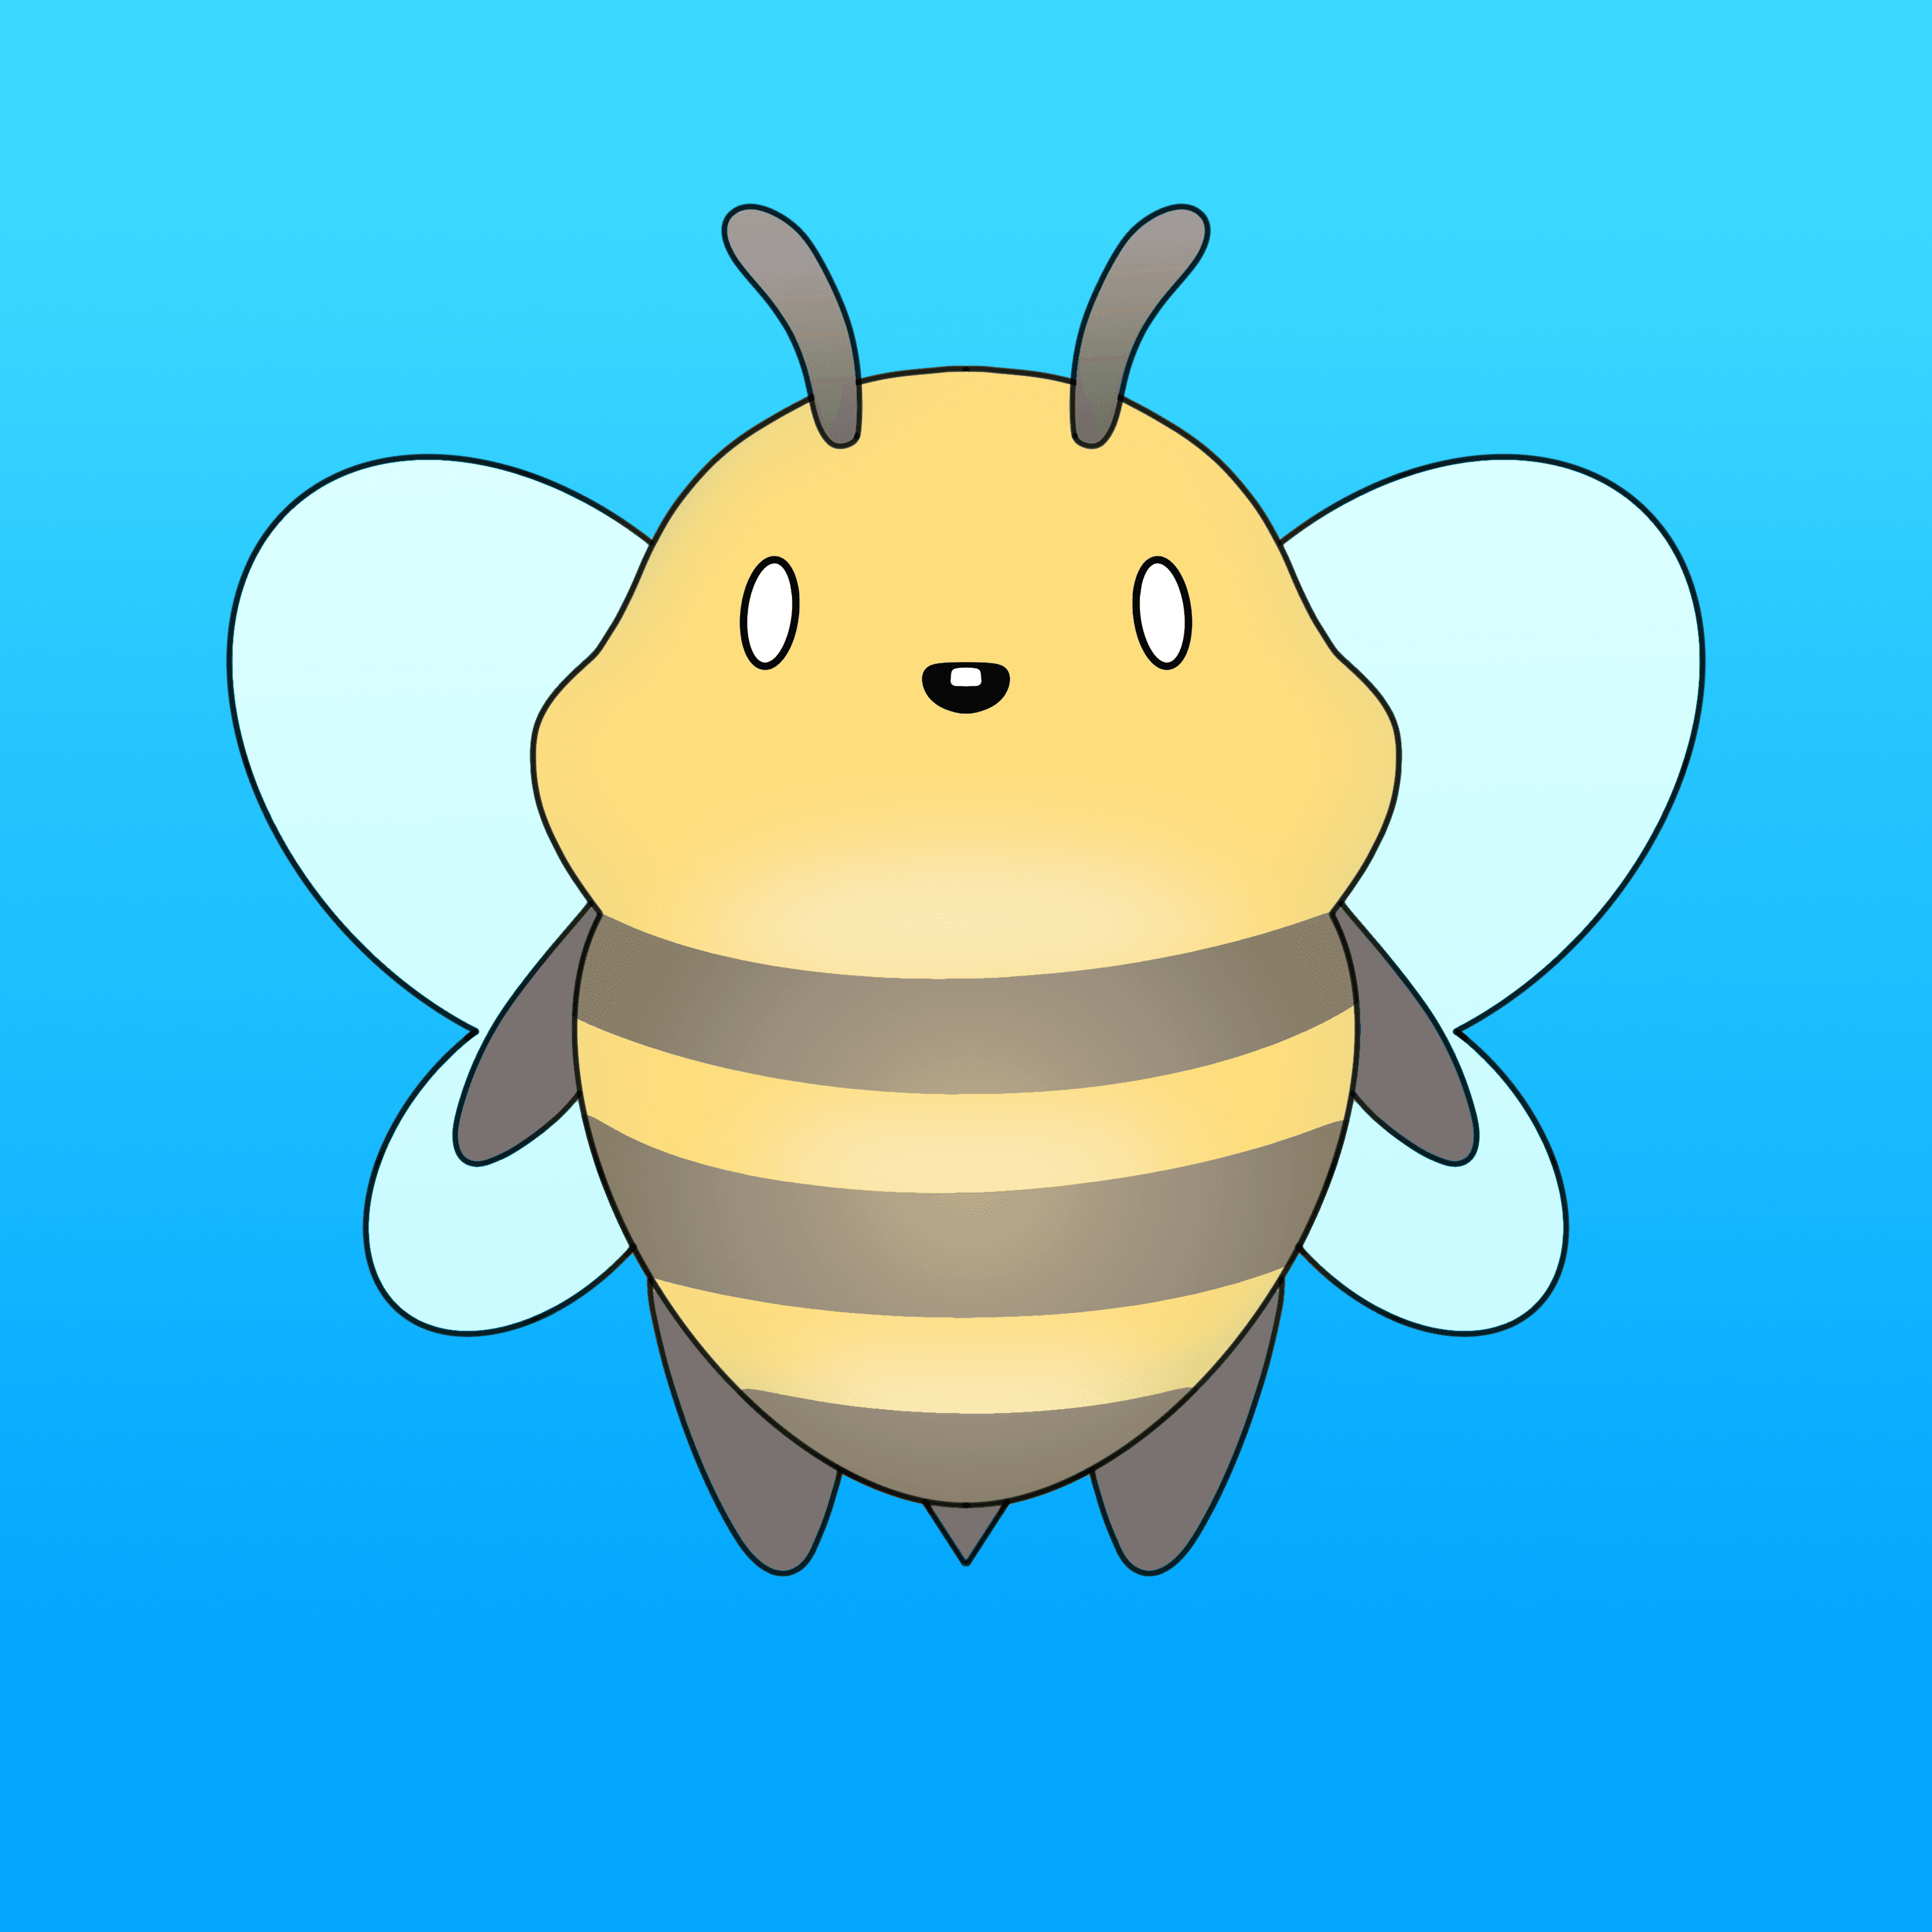 Just a bee #012